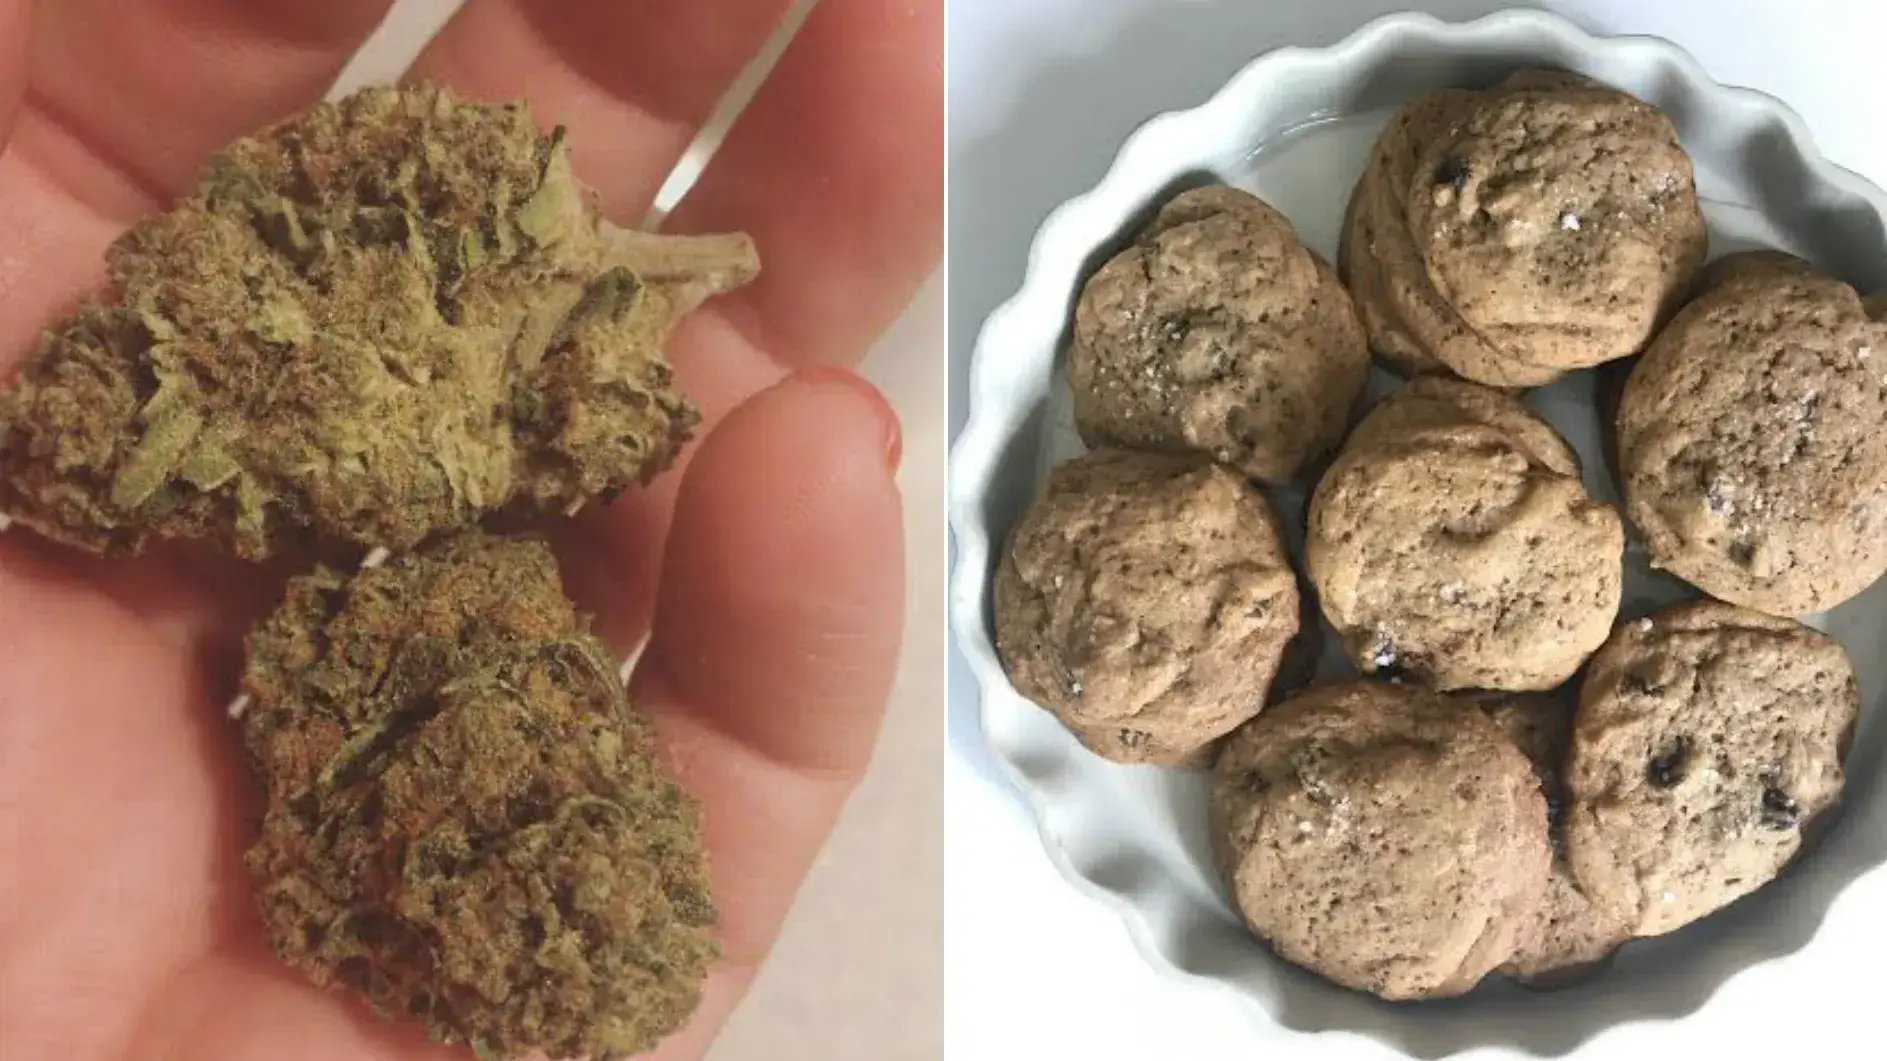 Edibles with Bad Weed?